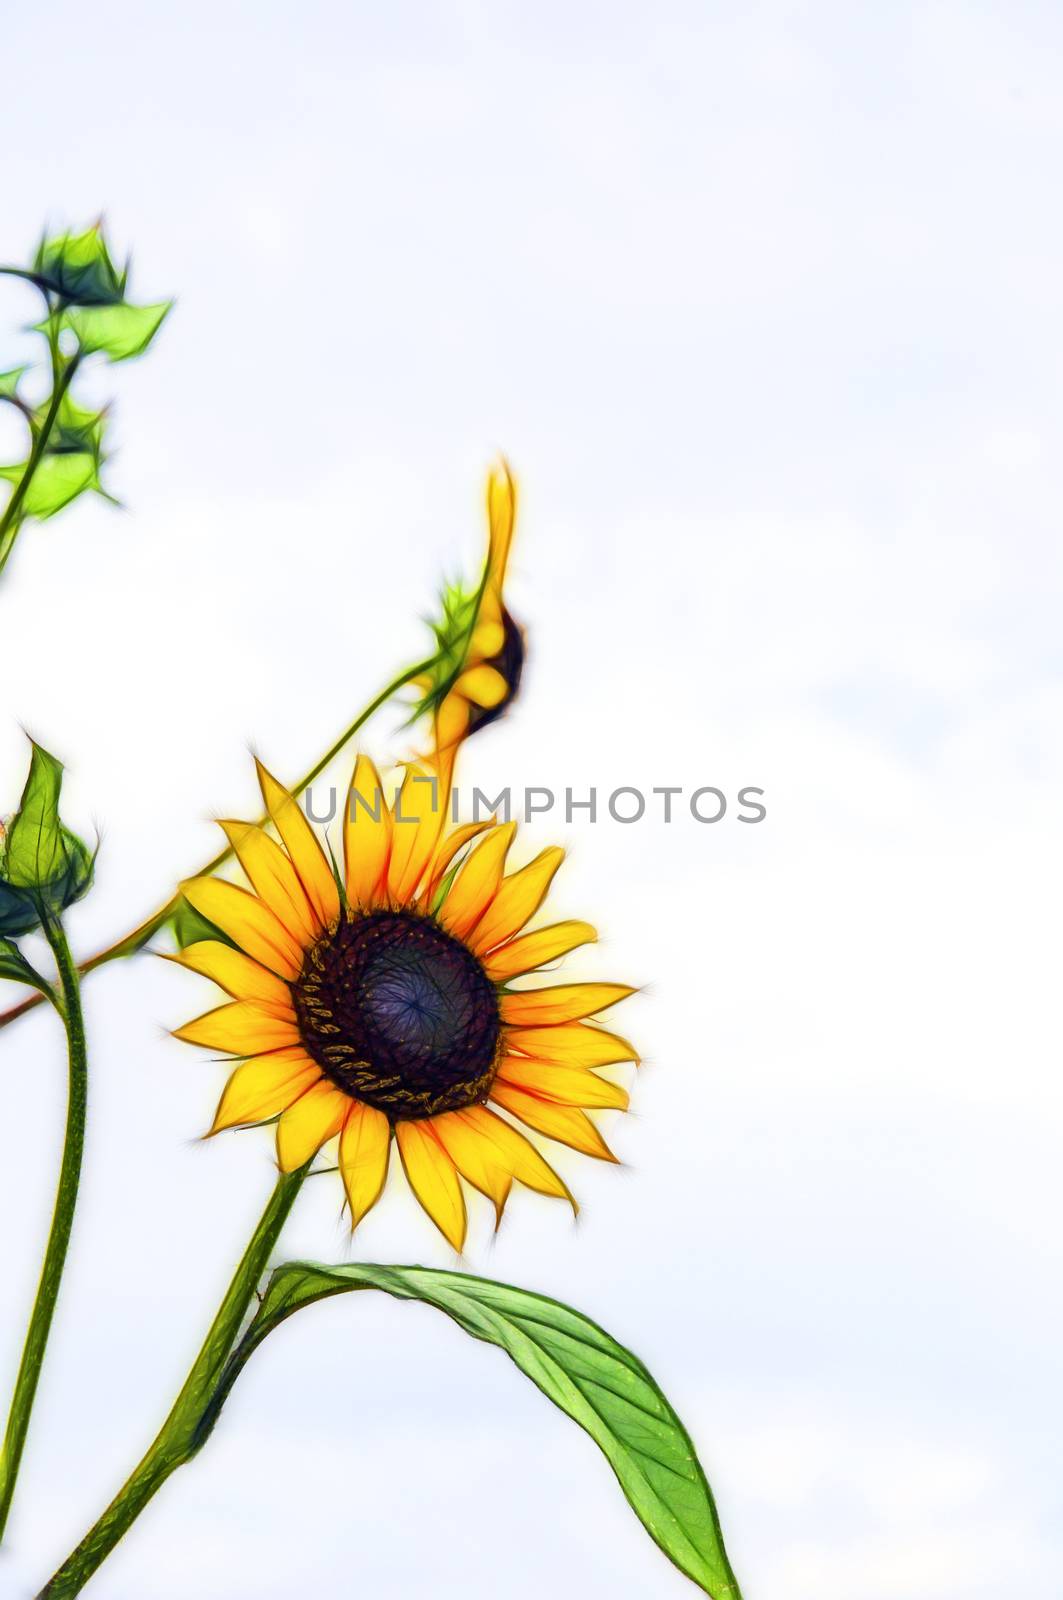 Rendered fractal from a photograph of a bright yellow sunflower